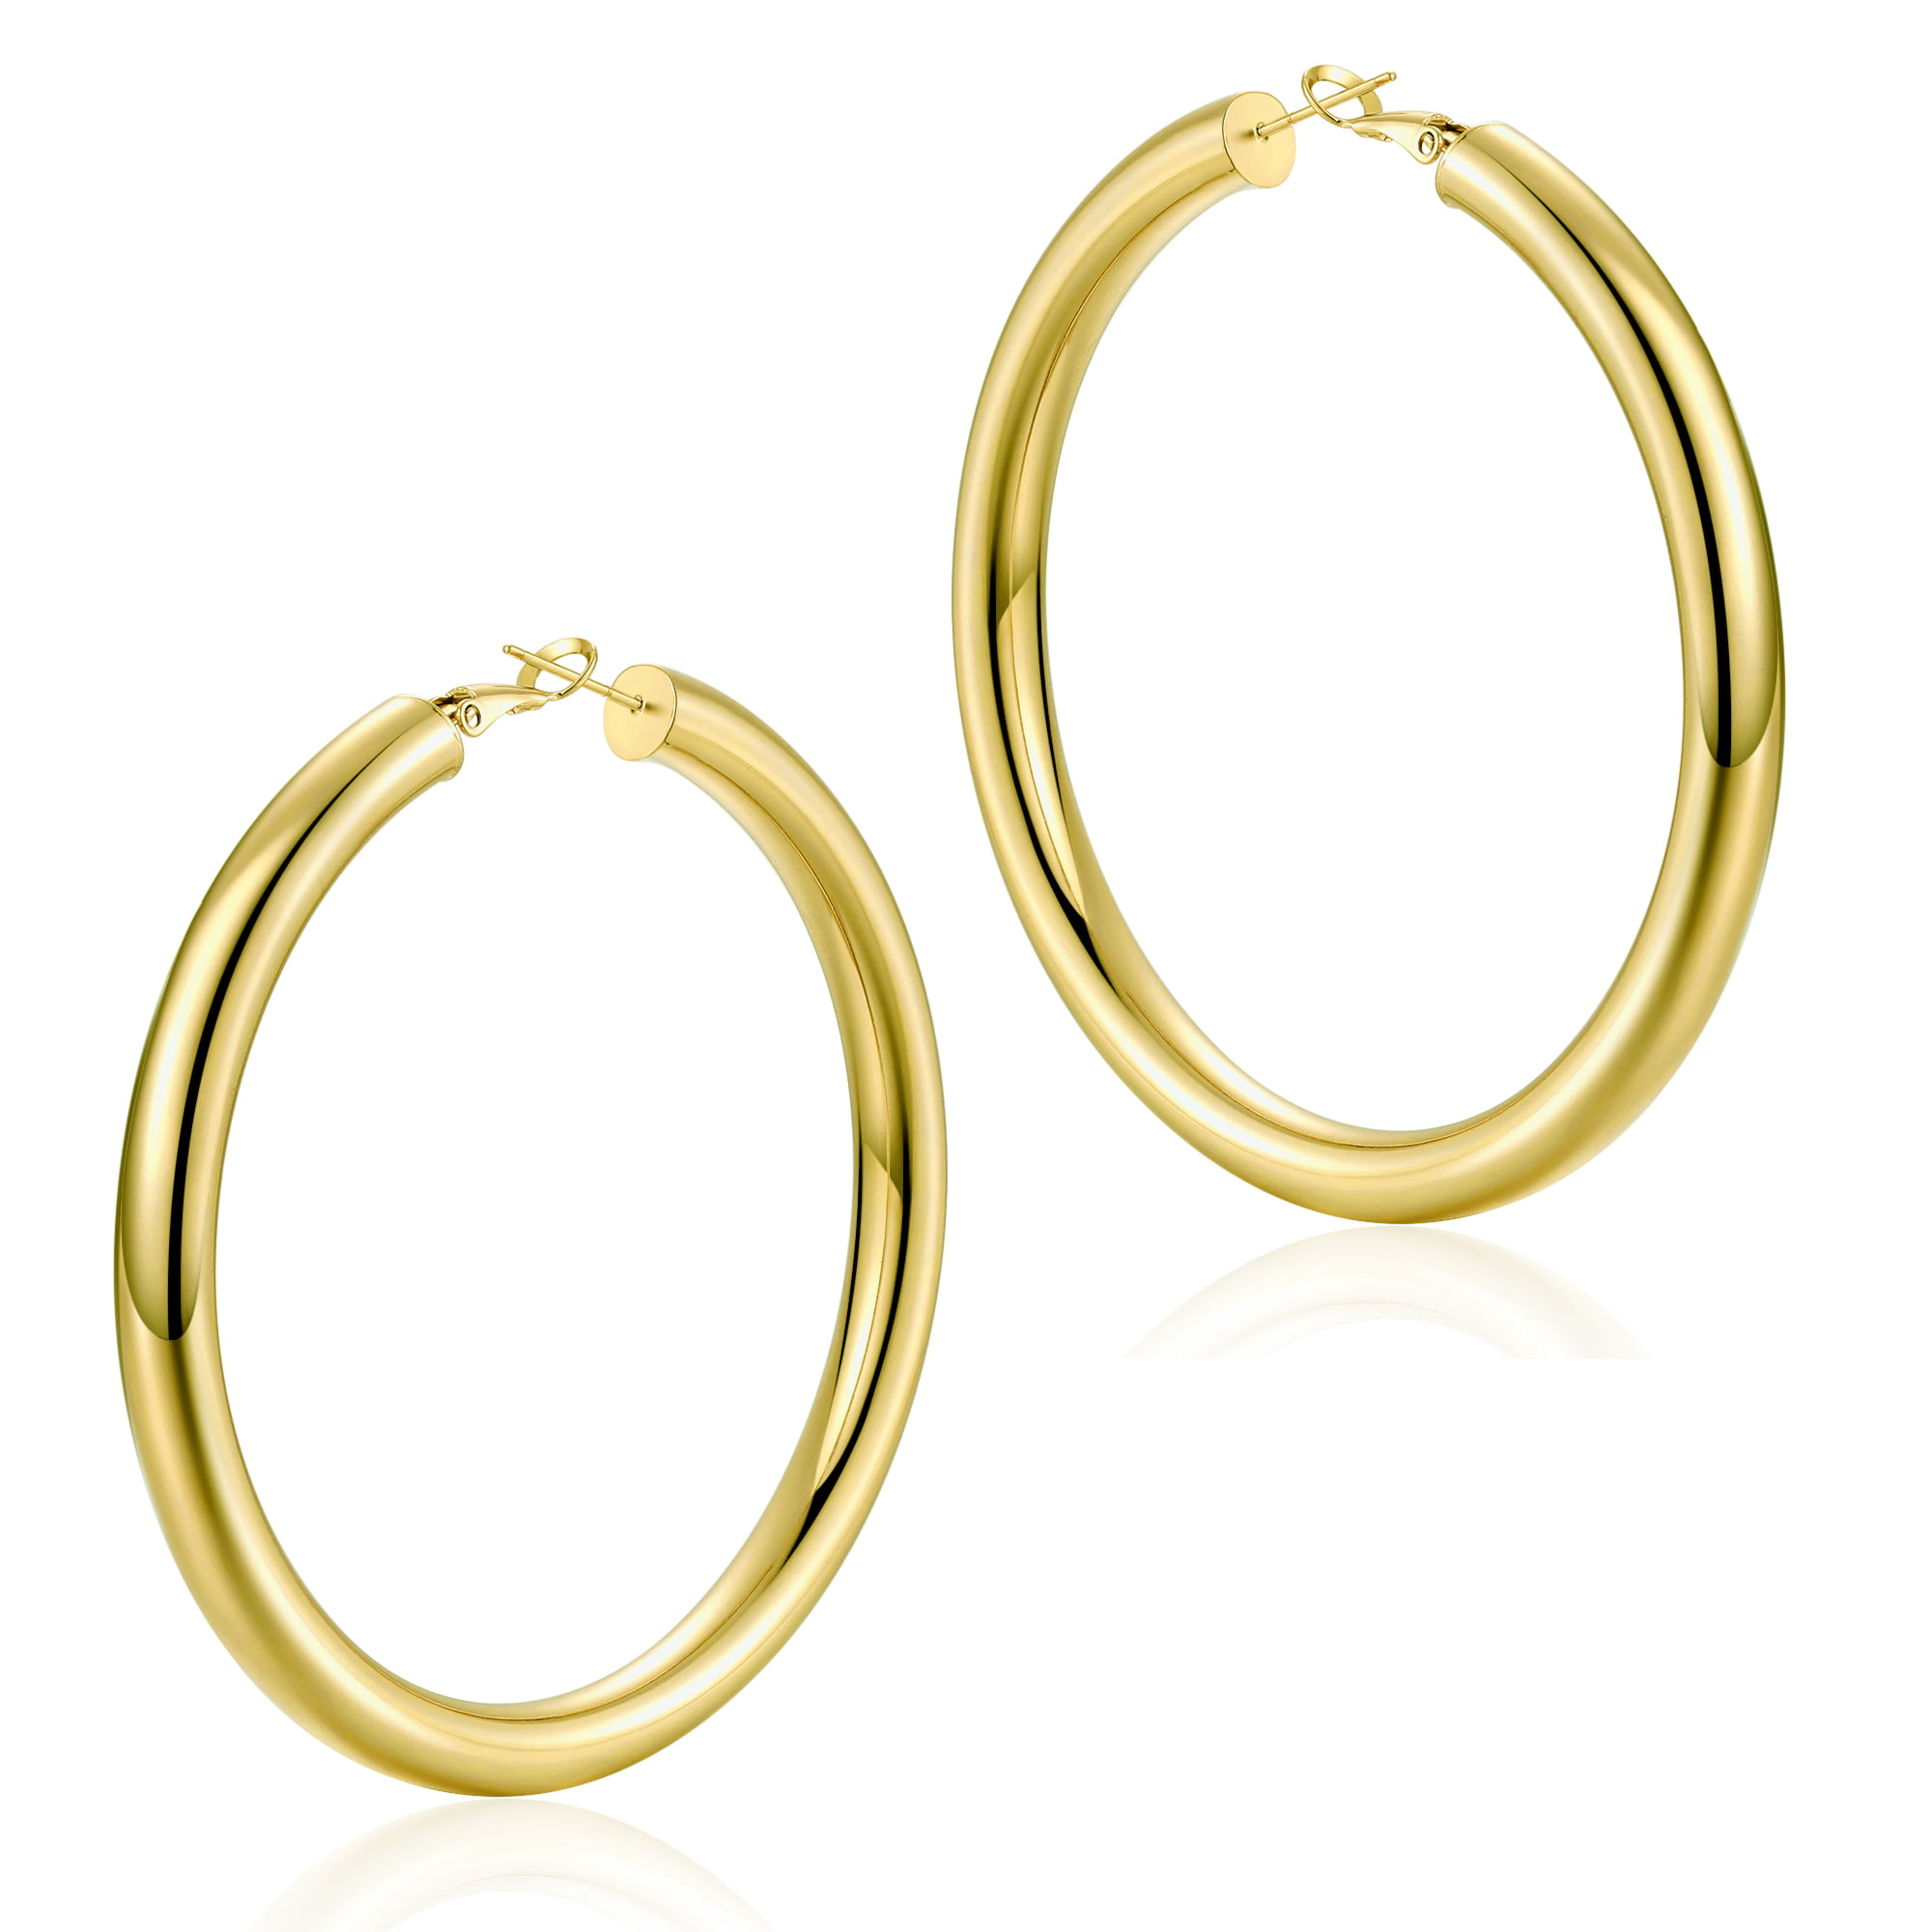 25mm Thin Lightweight Hoop Earrings Yellow Gold Flash Rose Gold Flash Sterling Silver 1 Pair 1mm Set